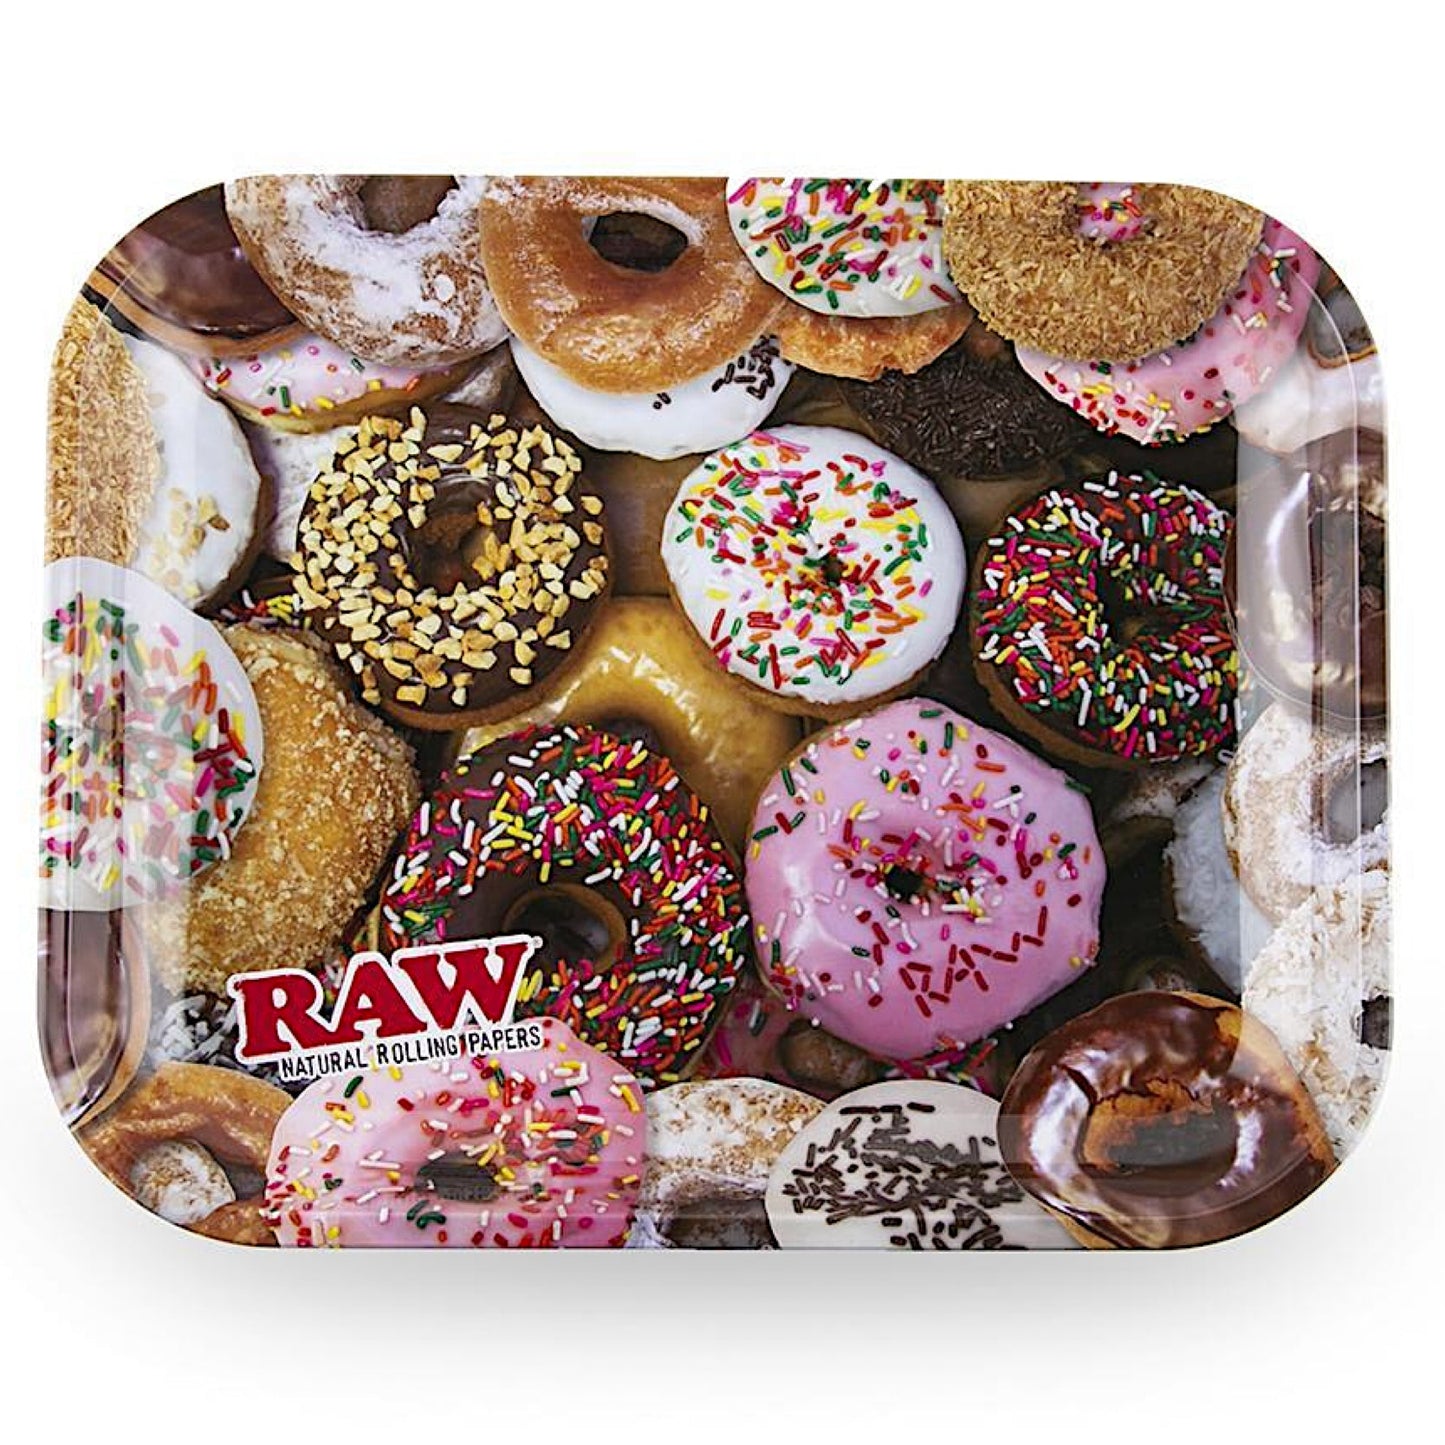 Raw® Donuts Large Metal Rolling Tray 🍩 (14 x 11) by RAW Rolling Papers | Mission Dispensary